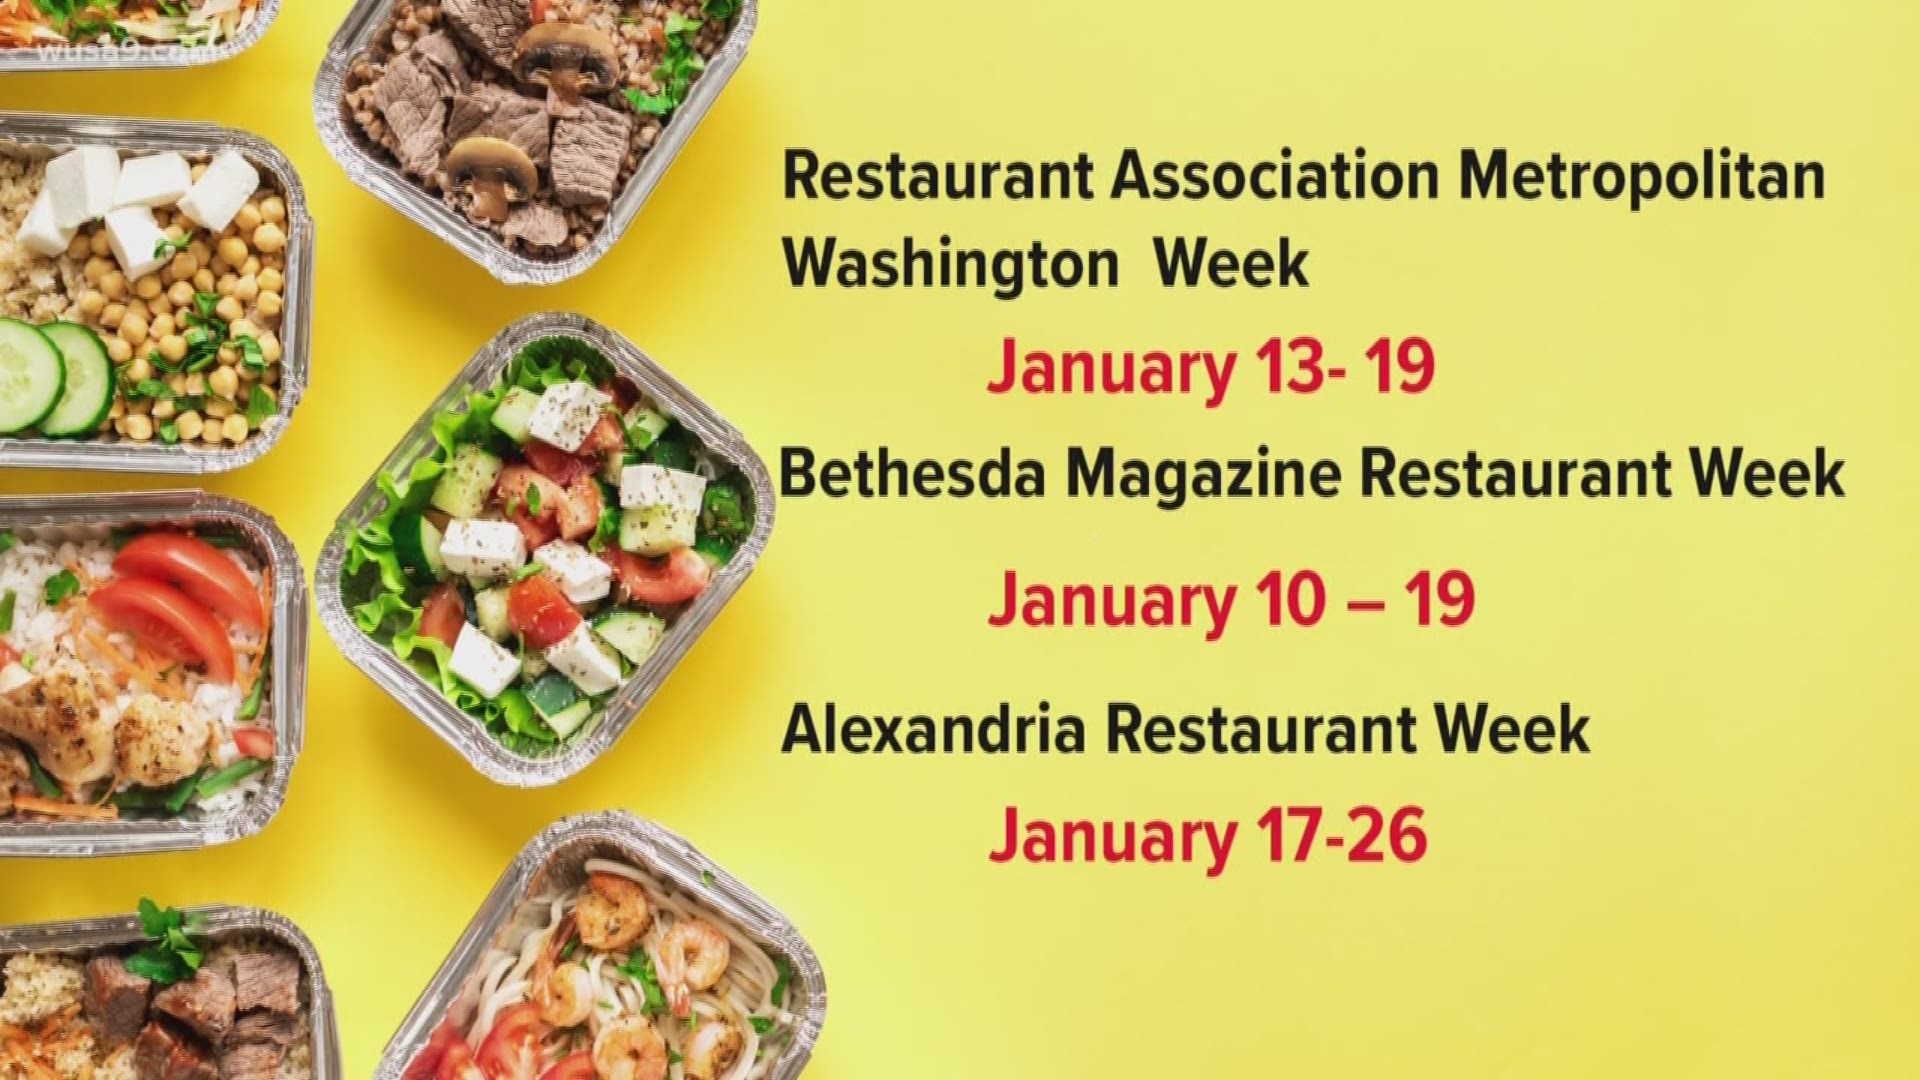 There are more than 250 restaurants participating, including 25 spots never before included in the promotion.